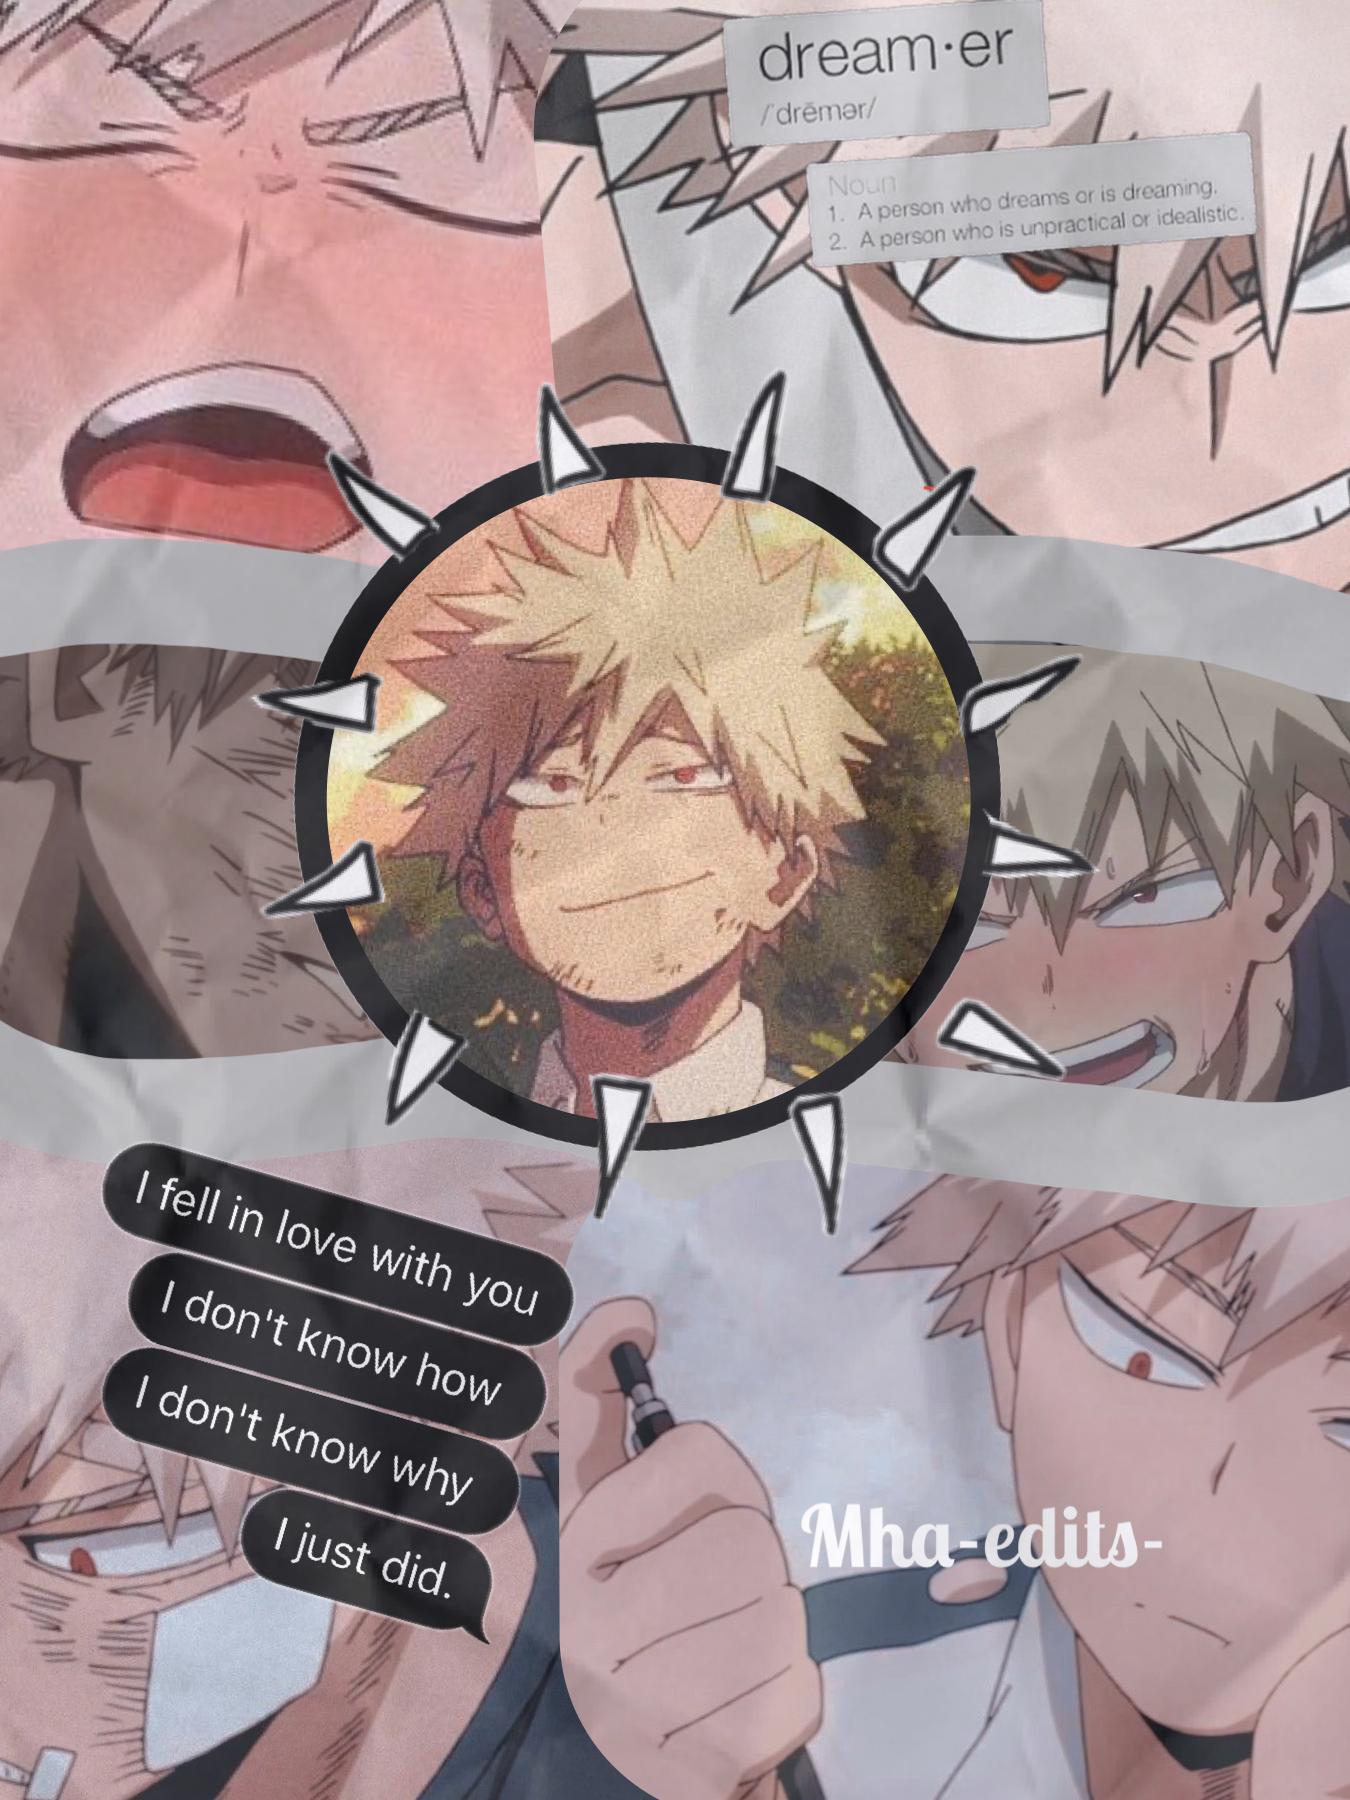 (❤️tap💥)

BAKUGO💥👏🏻😡
The angriest character there!🤣😳
Thanks for the follows!